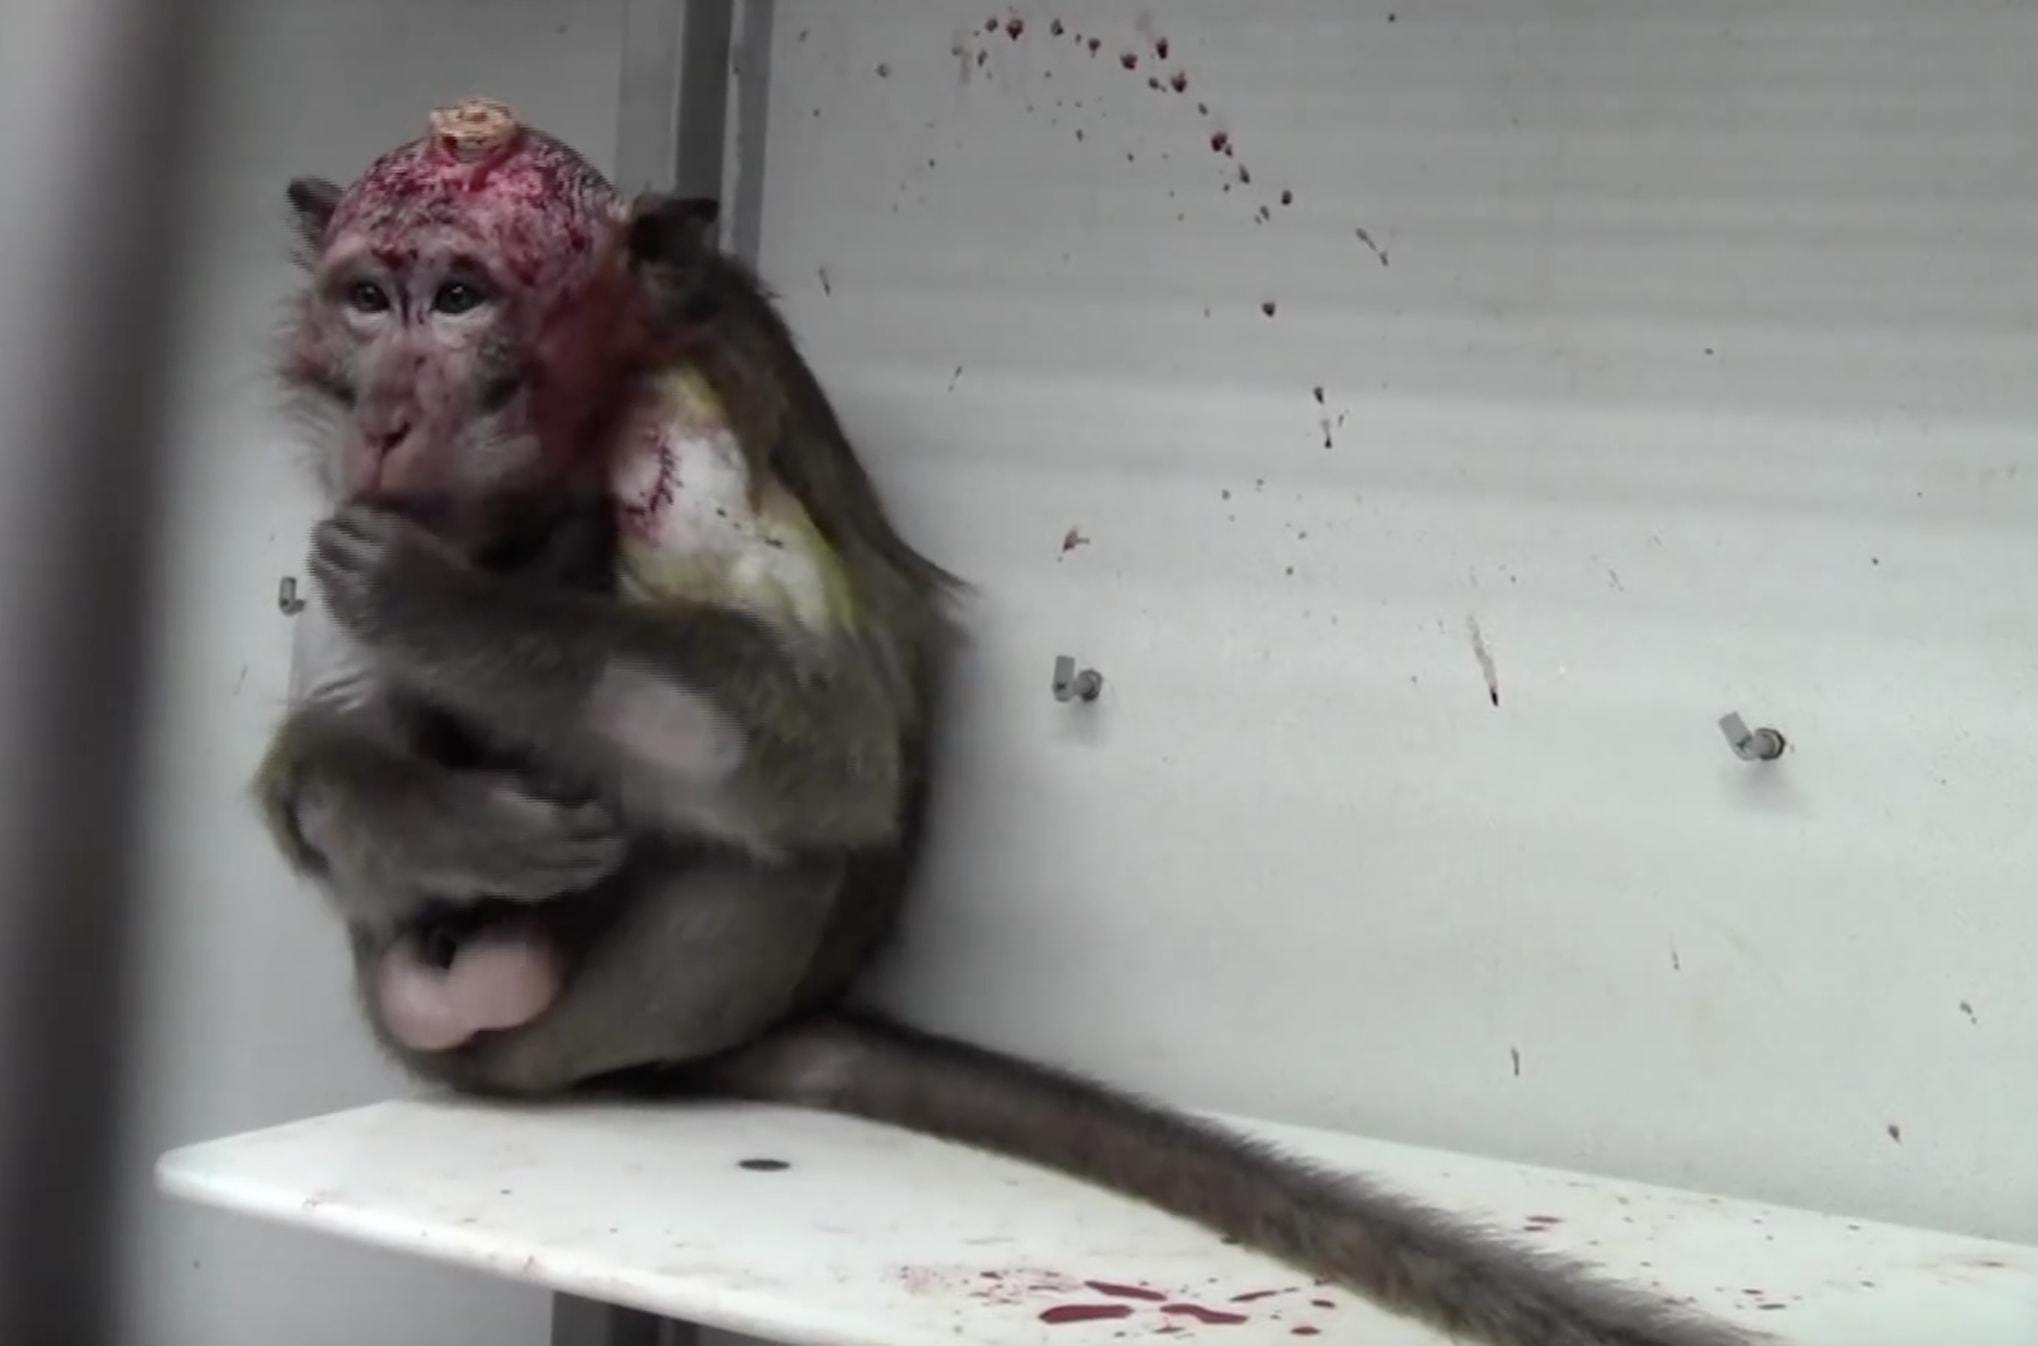 Monkey Researchers In Germany Facing Animal Cruelty Charges For Causing  'Significant Harm'